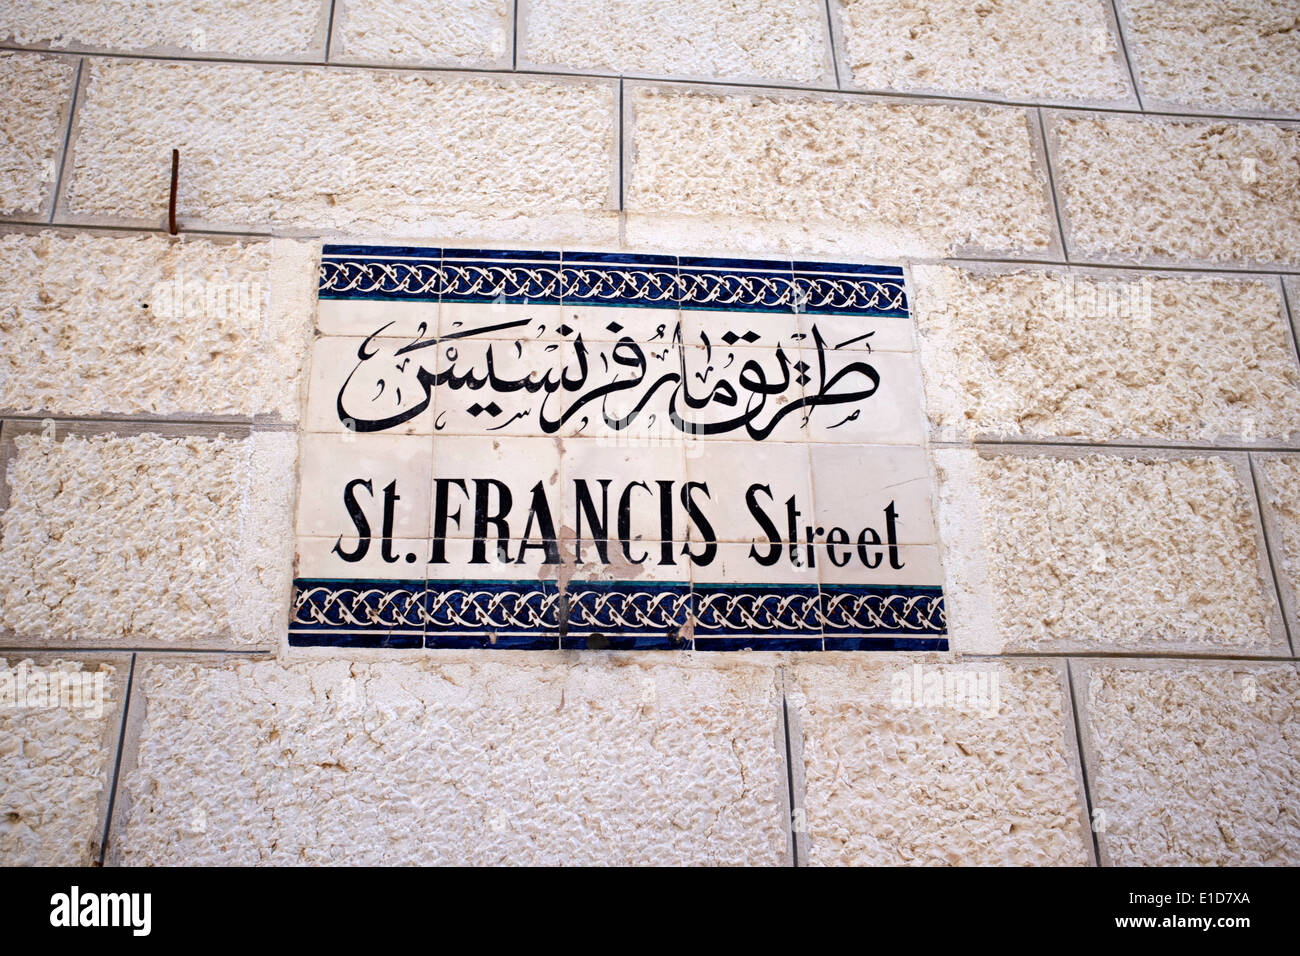 Sign for St. Francis Street in the Old City of Jerusalem, Israel Stock Photo